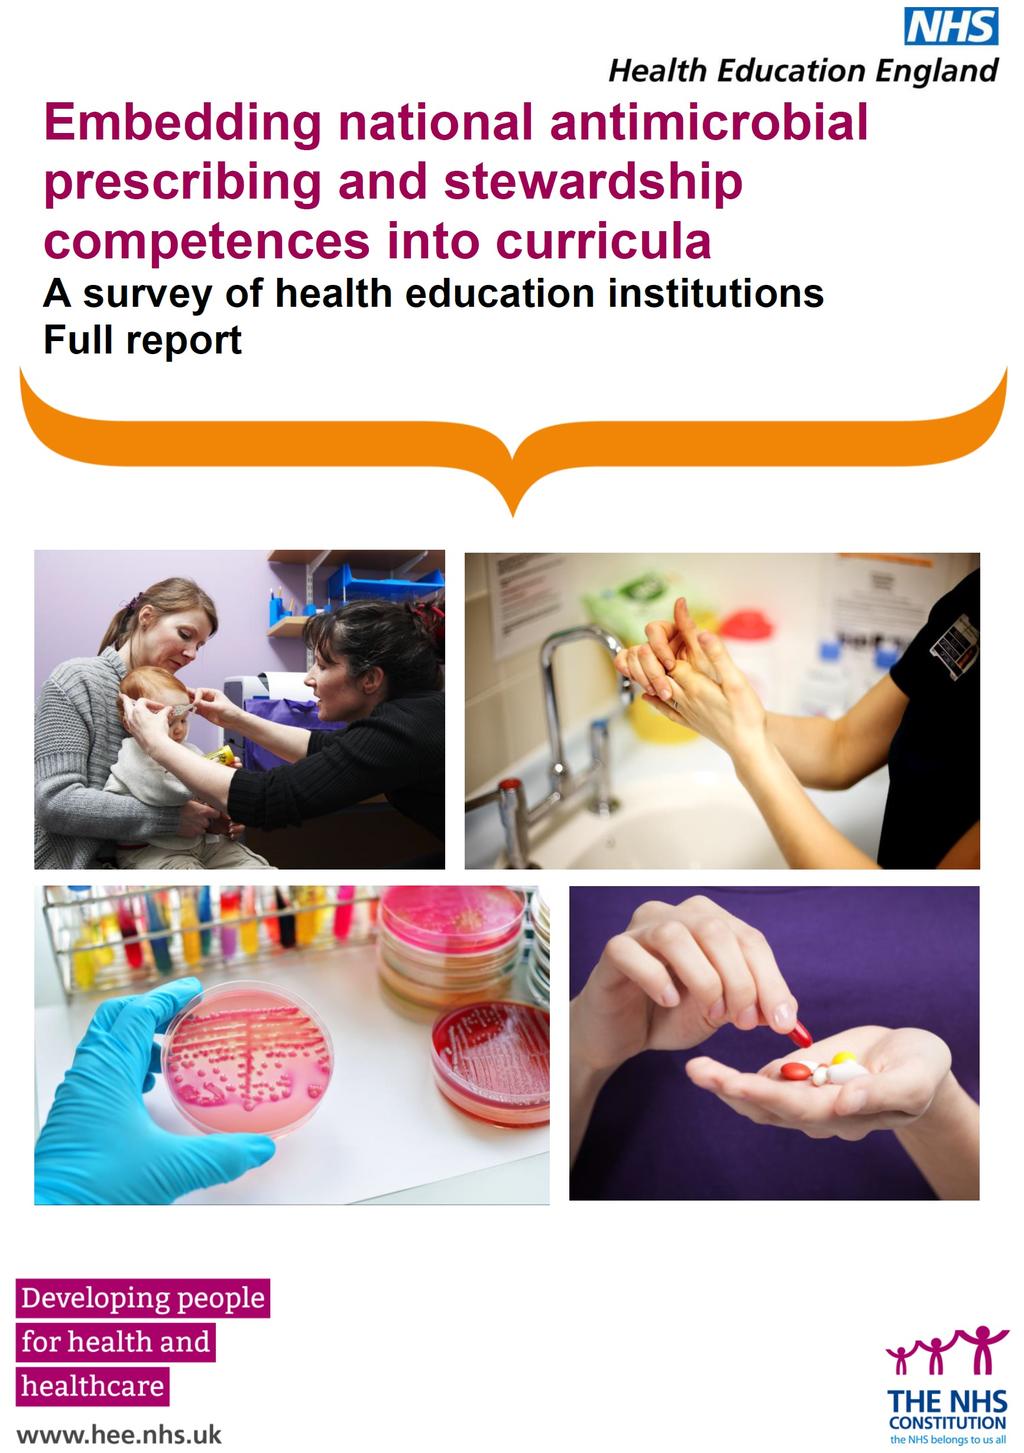 Embedding competencies into curricula Survey of HEIs sent through HEE local offices to health education institutions: medicine, adult nursing, dentistry, pharmacy, midwifery, AHPs and independent